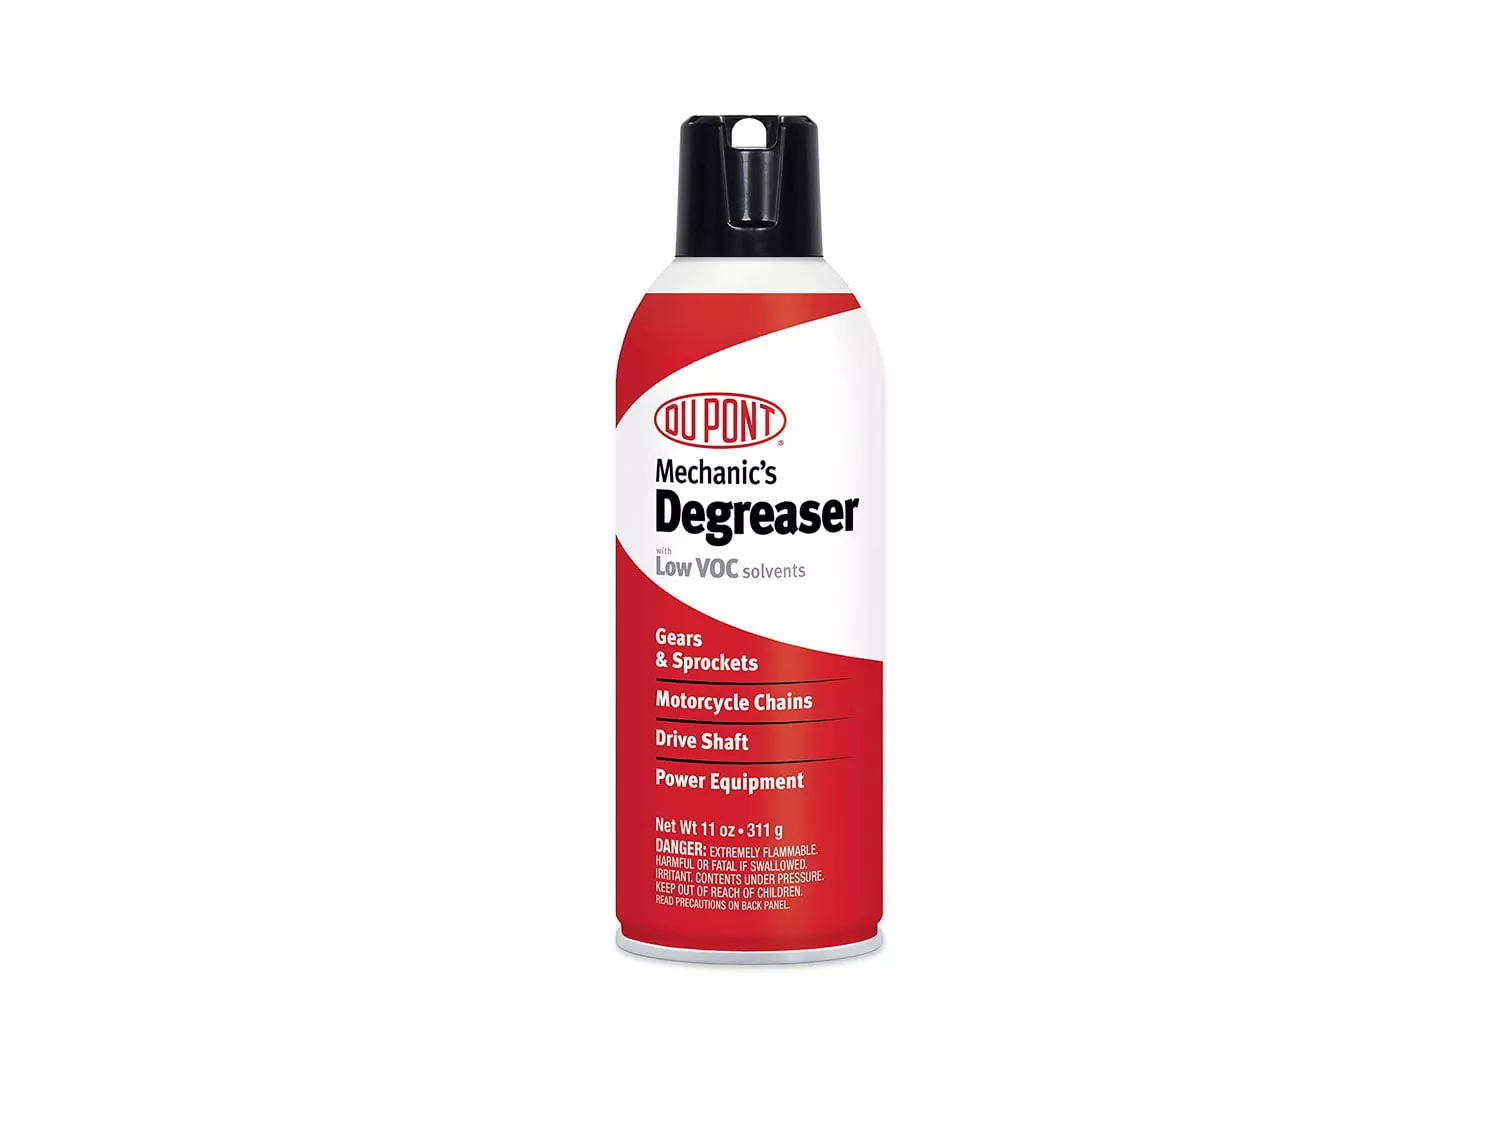 DuPont Motorcycle Degreaser